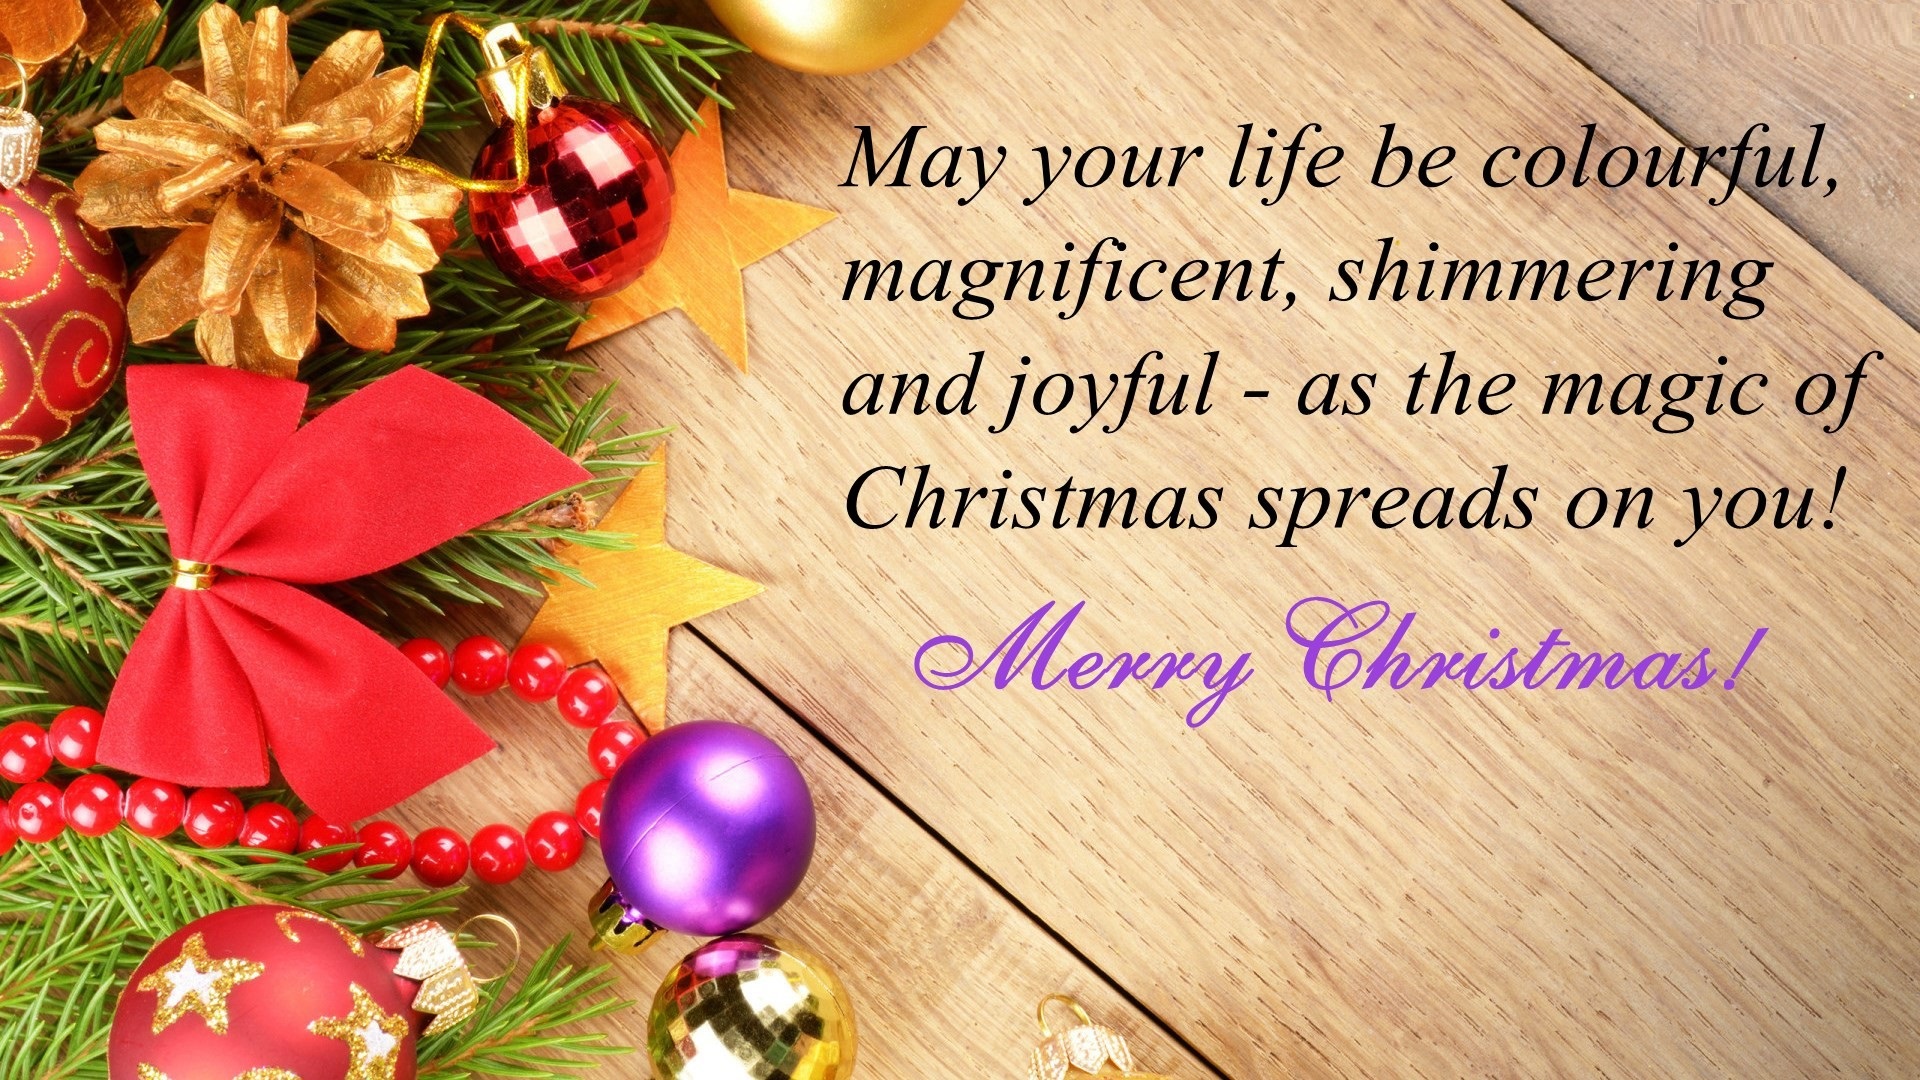 Merry-Christmas-2015-Messages-And-Wishes.